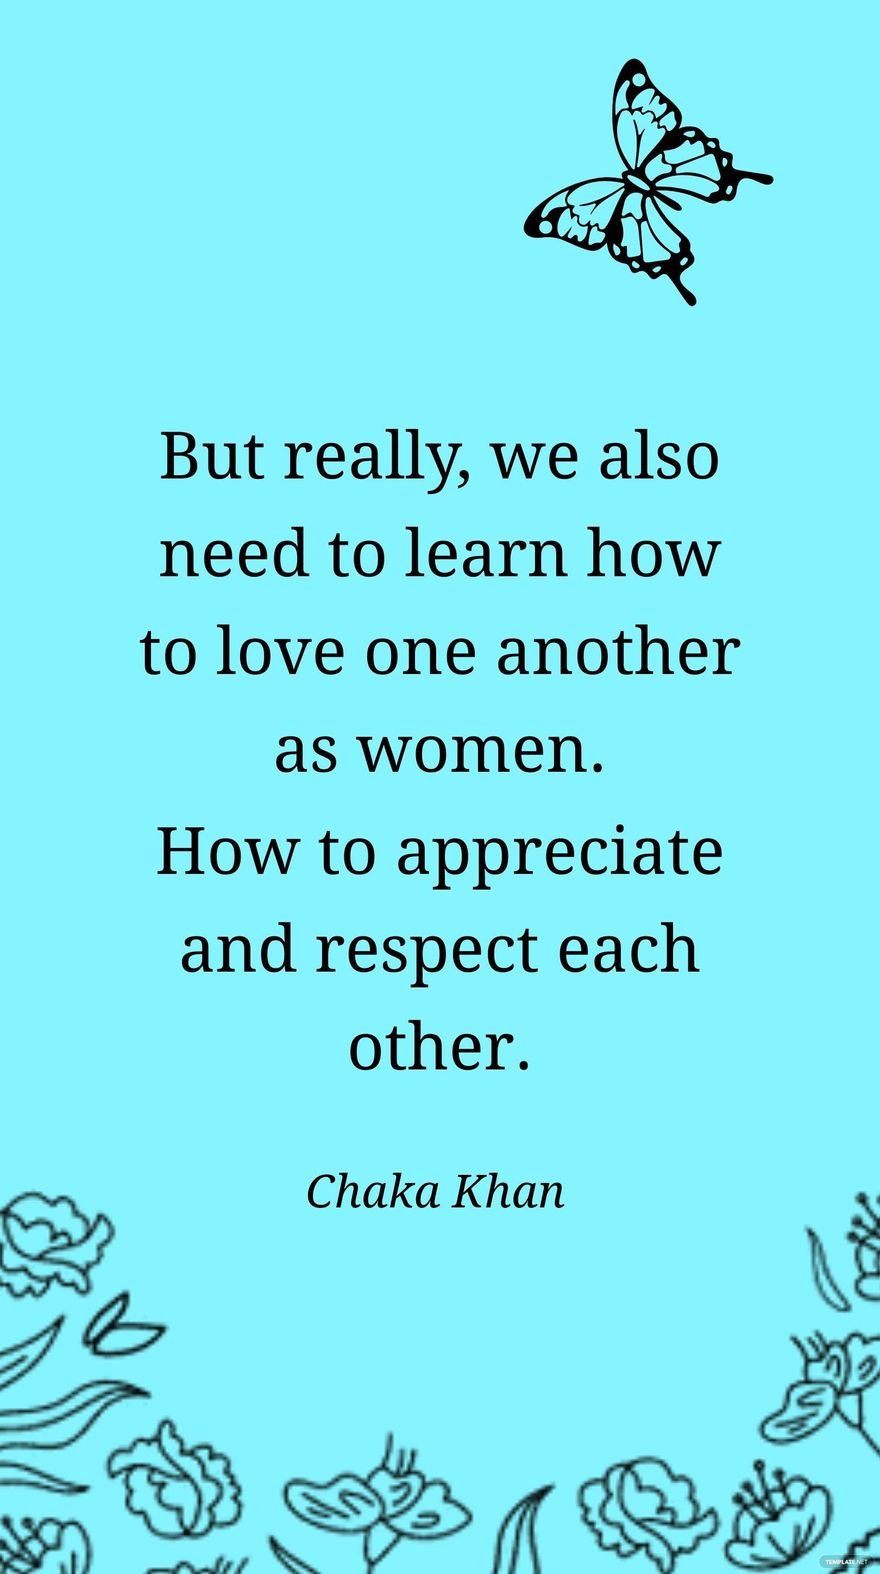 Chaka Khan- But really, we also need to learn how to love one another as women. How to appreciate and respect each other.